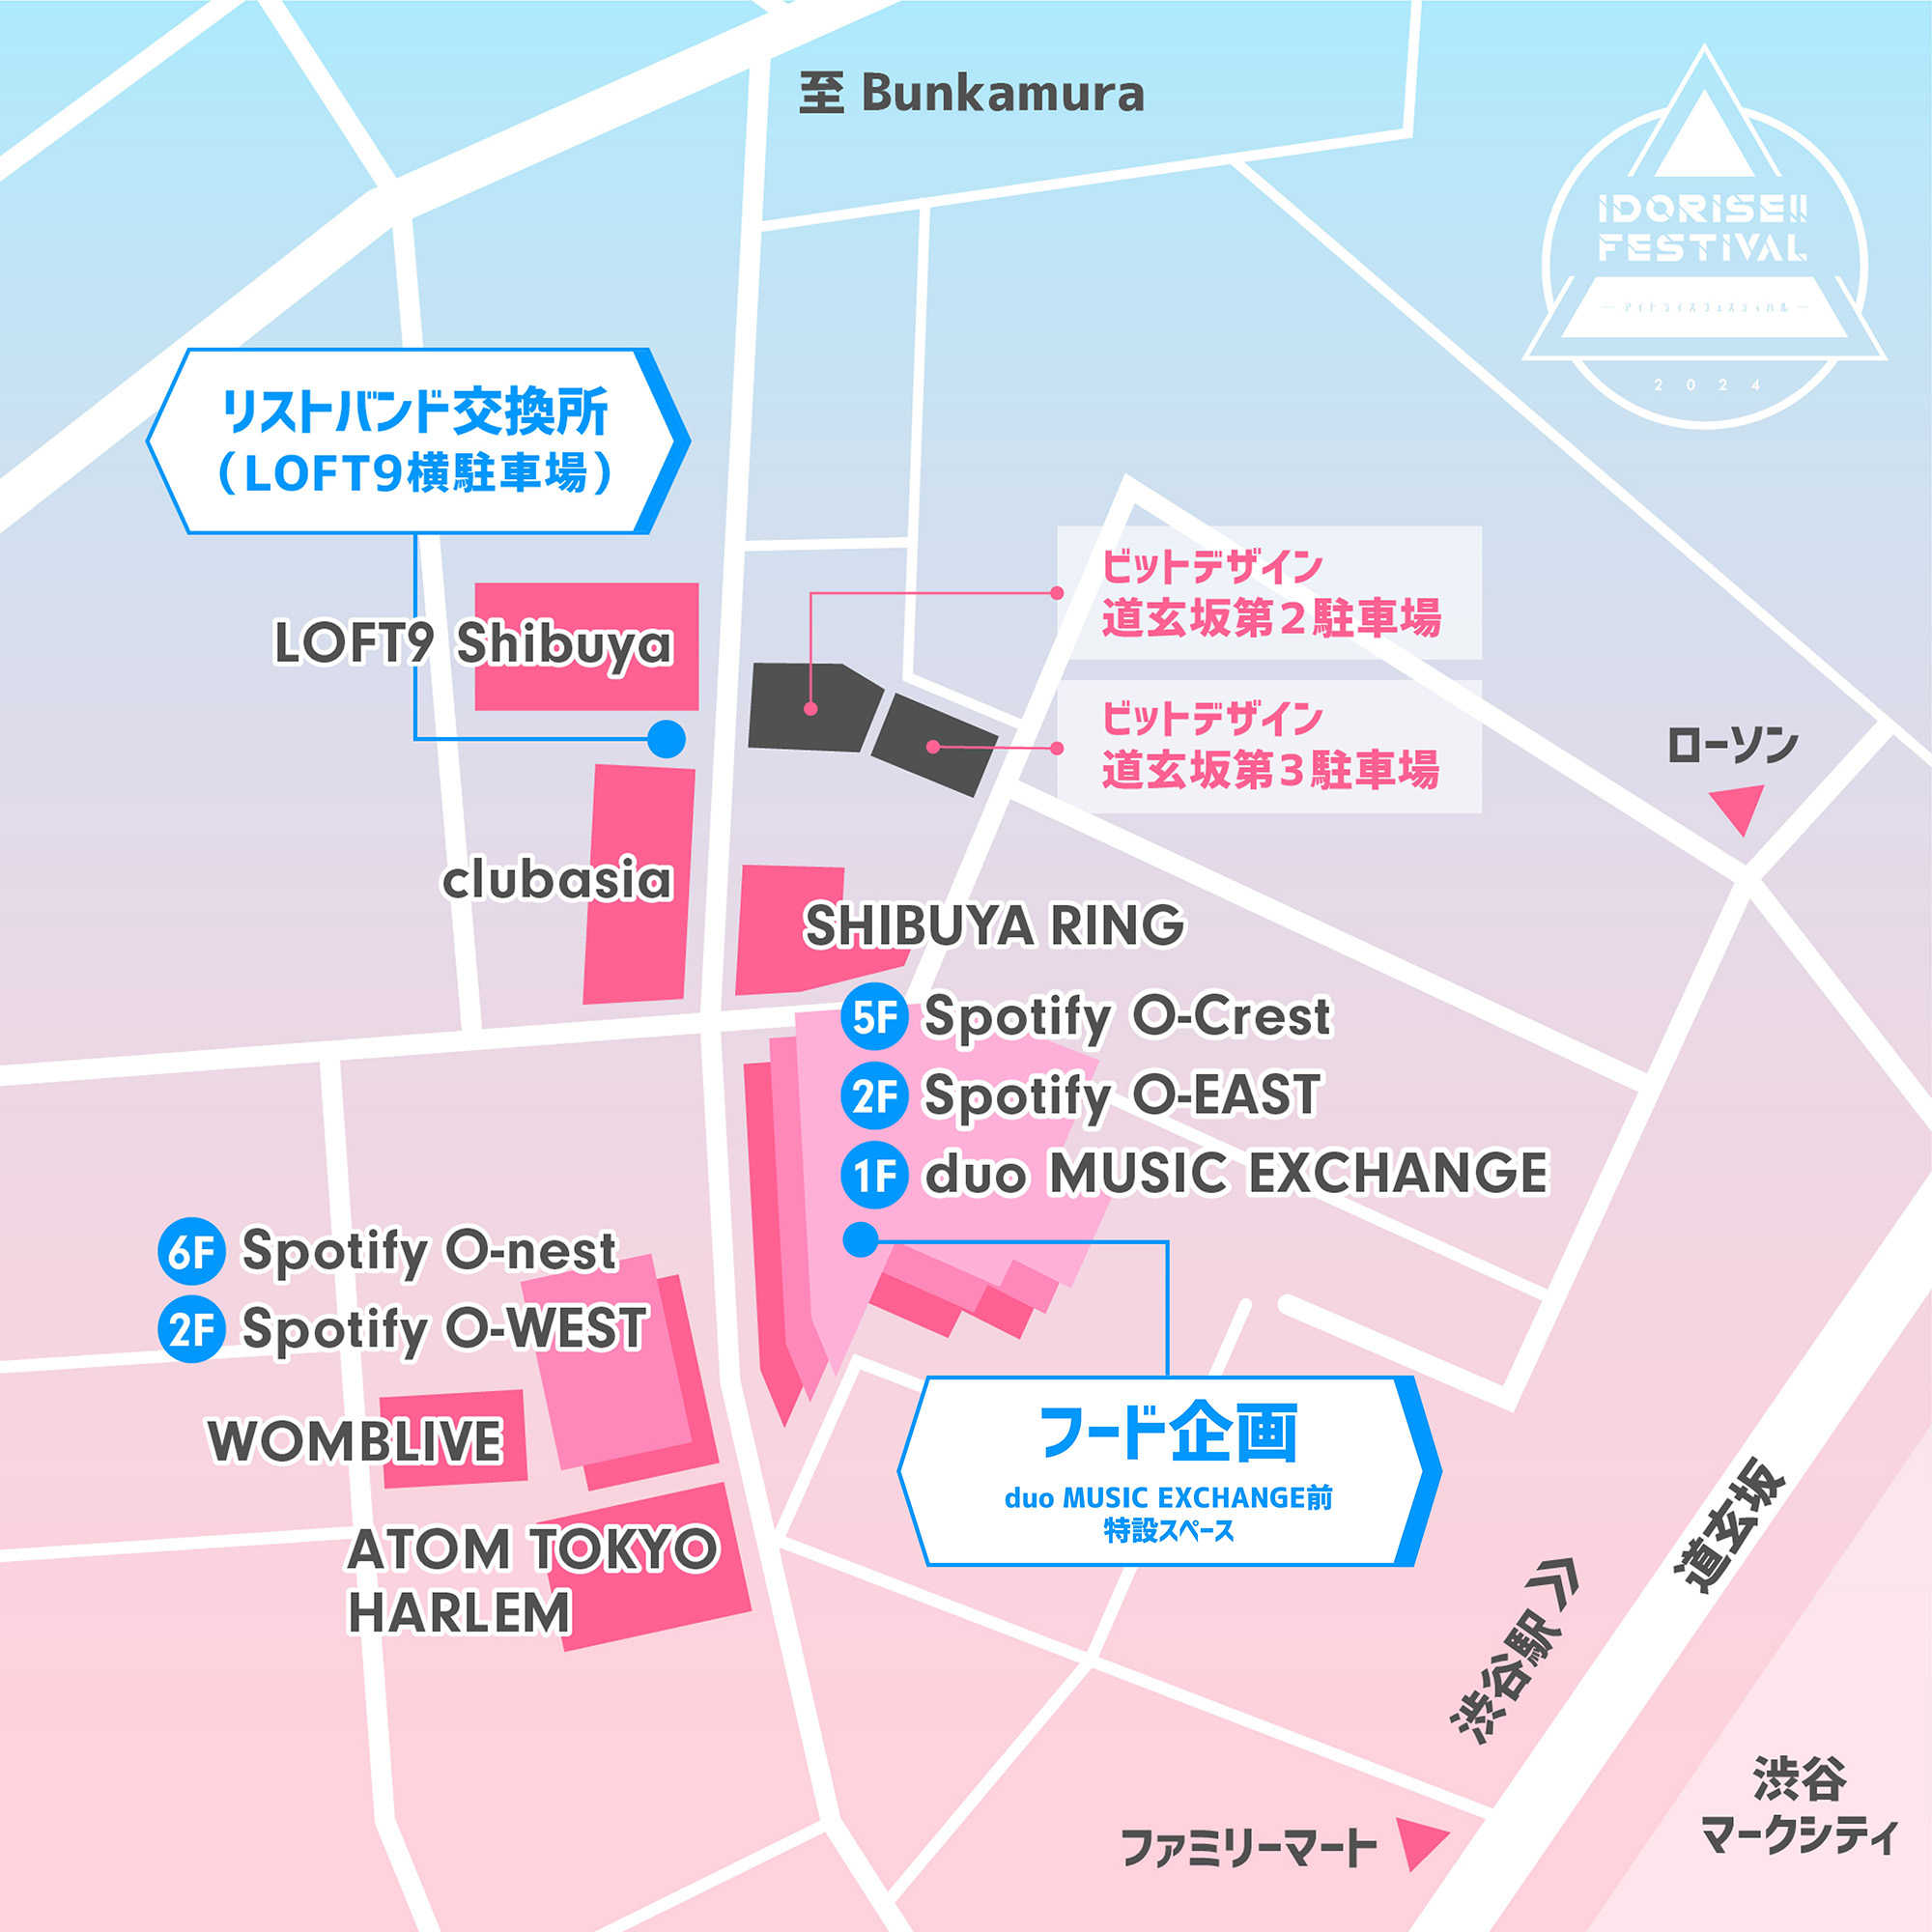 DAY ACCESS MAP